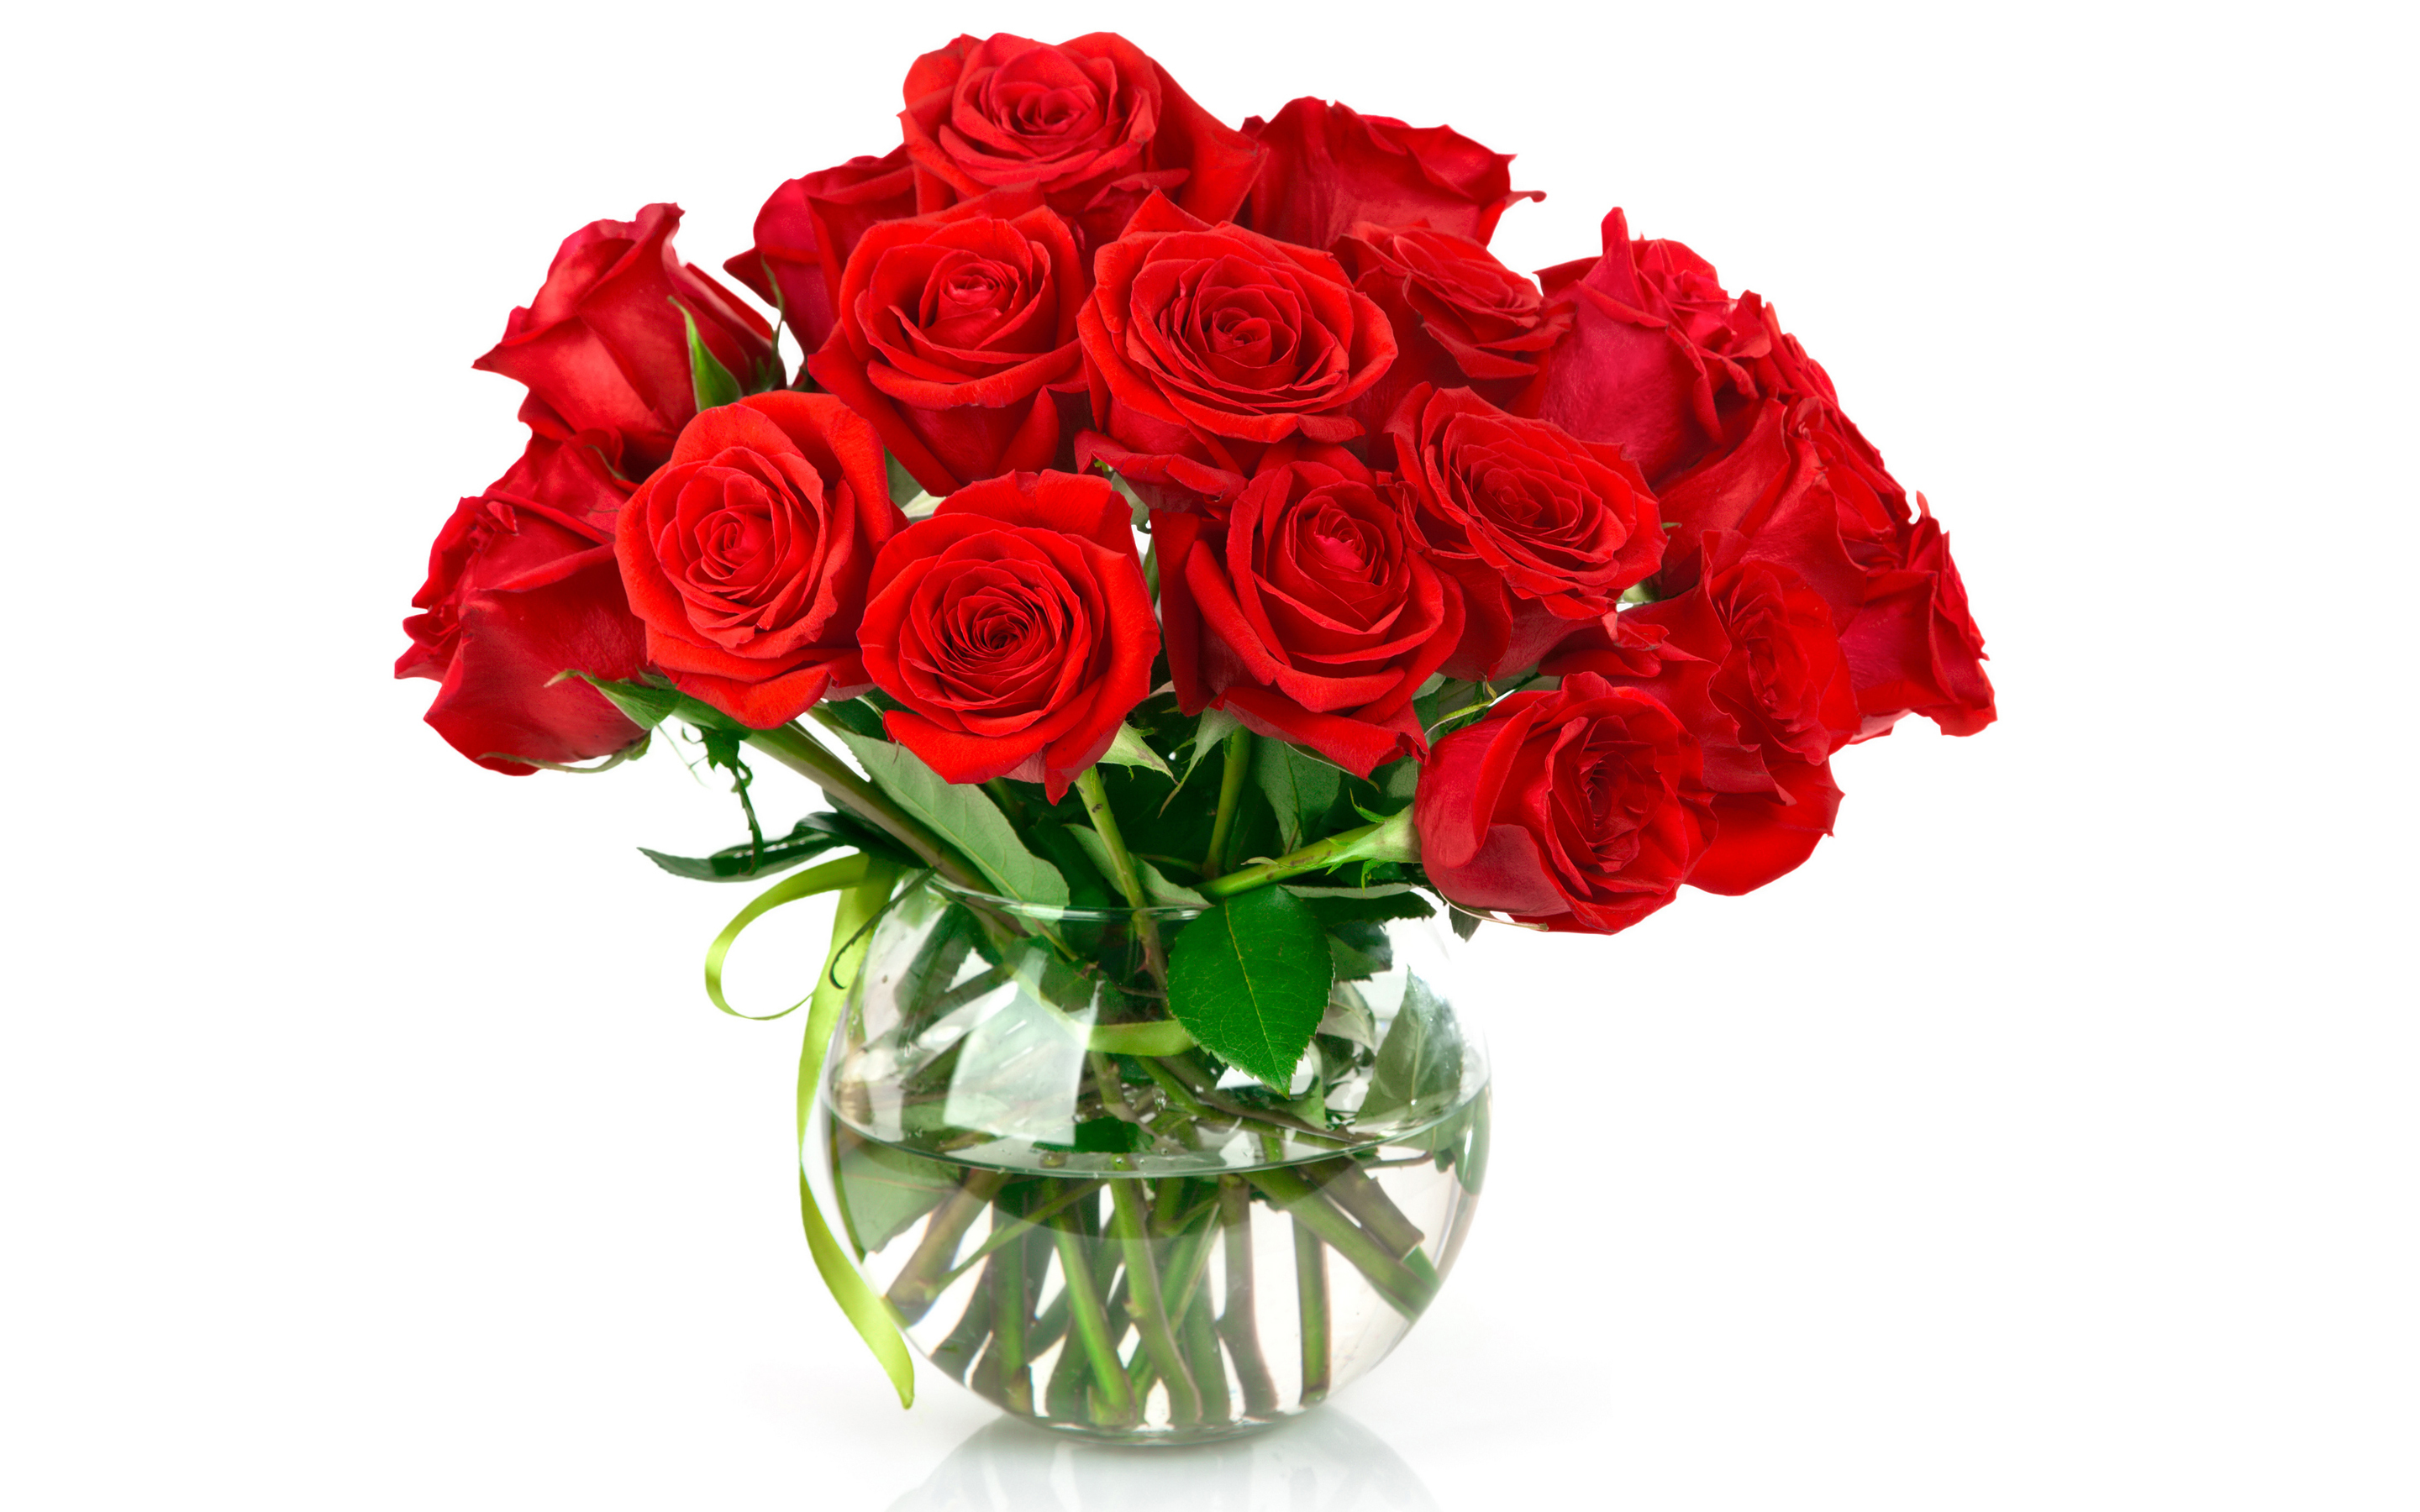 Vase Of Roses Wallpaper High Definition Quality Widescreen